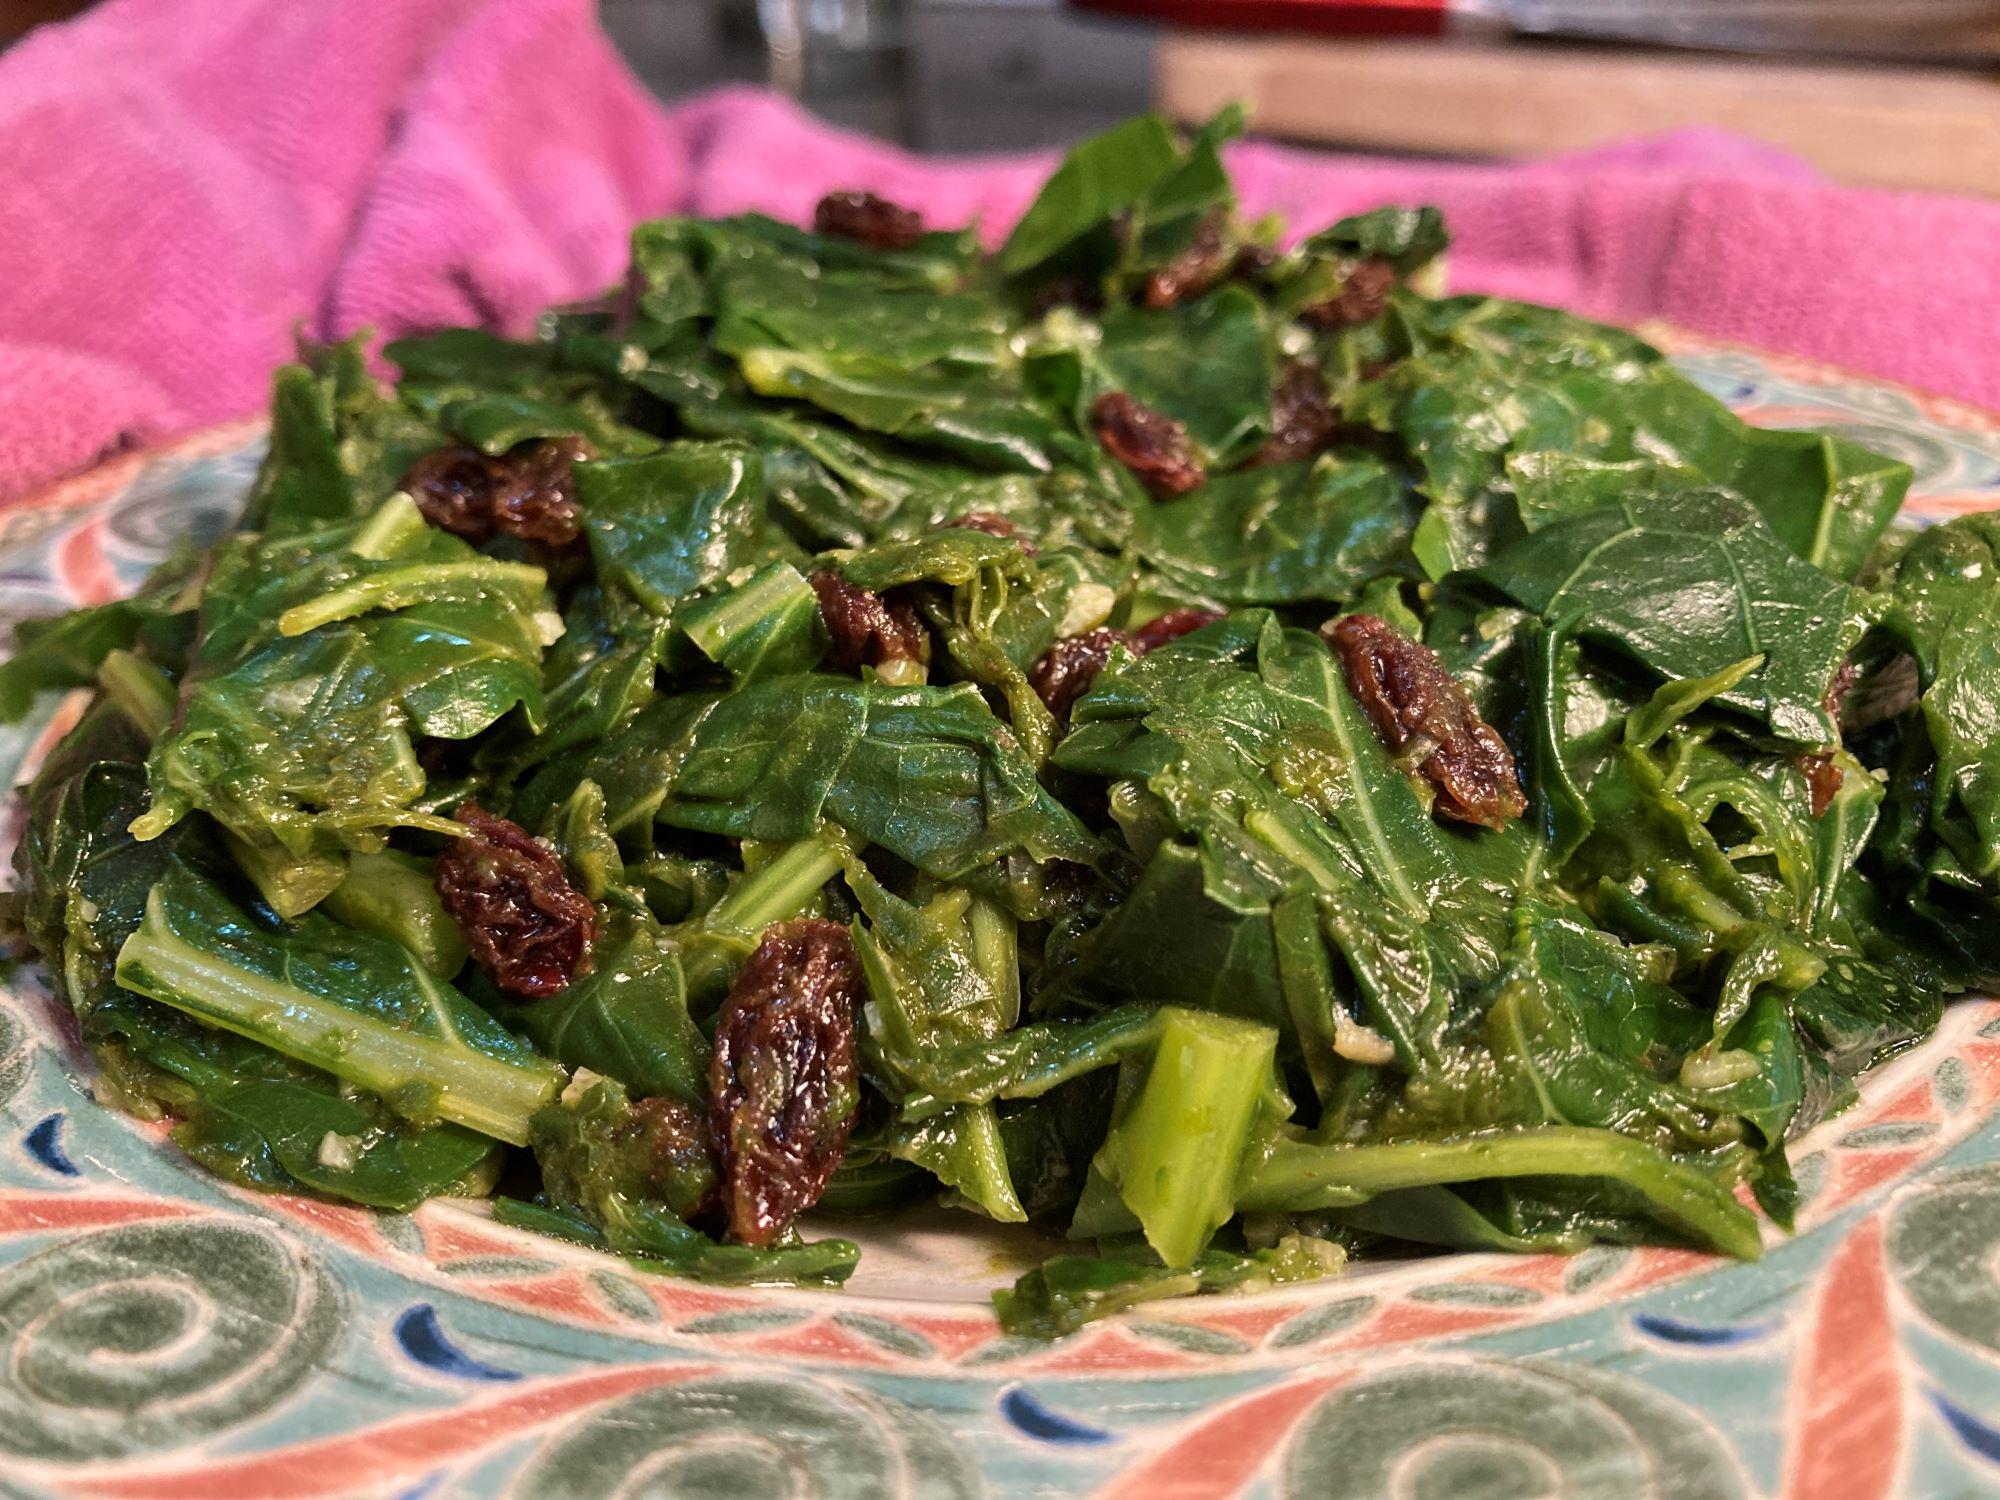 Collard greens mixed with raisins and on a colorful patterned plate with a pink towel in the background.